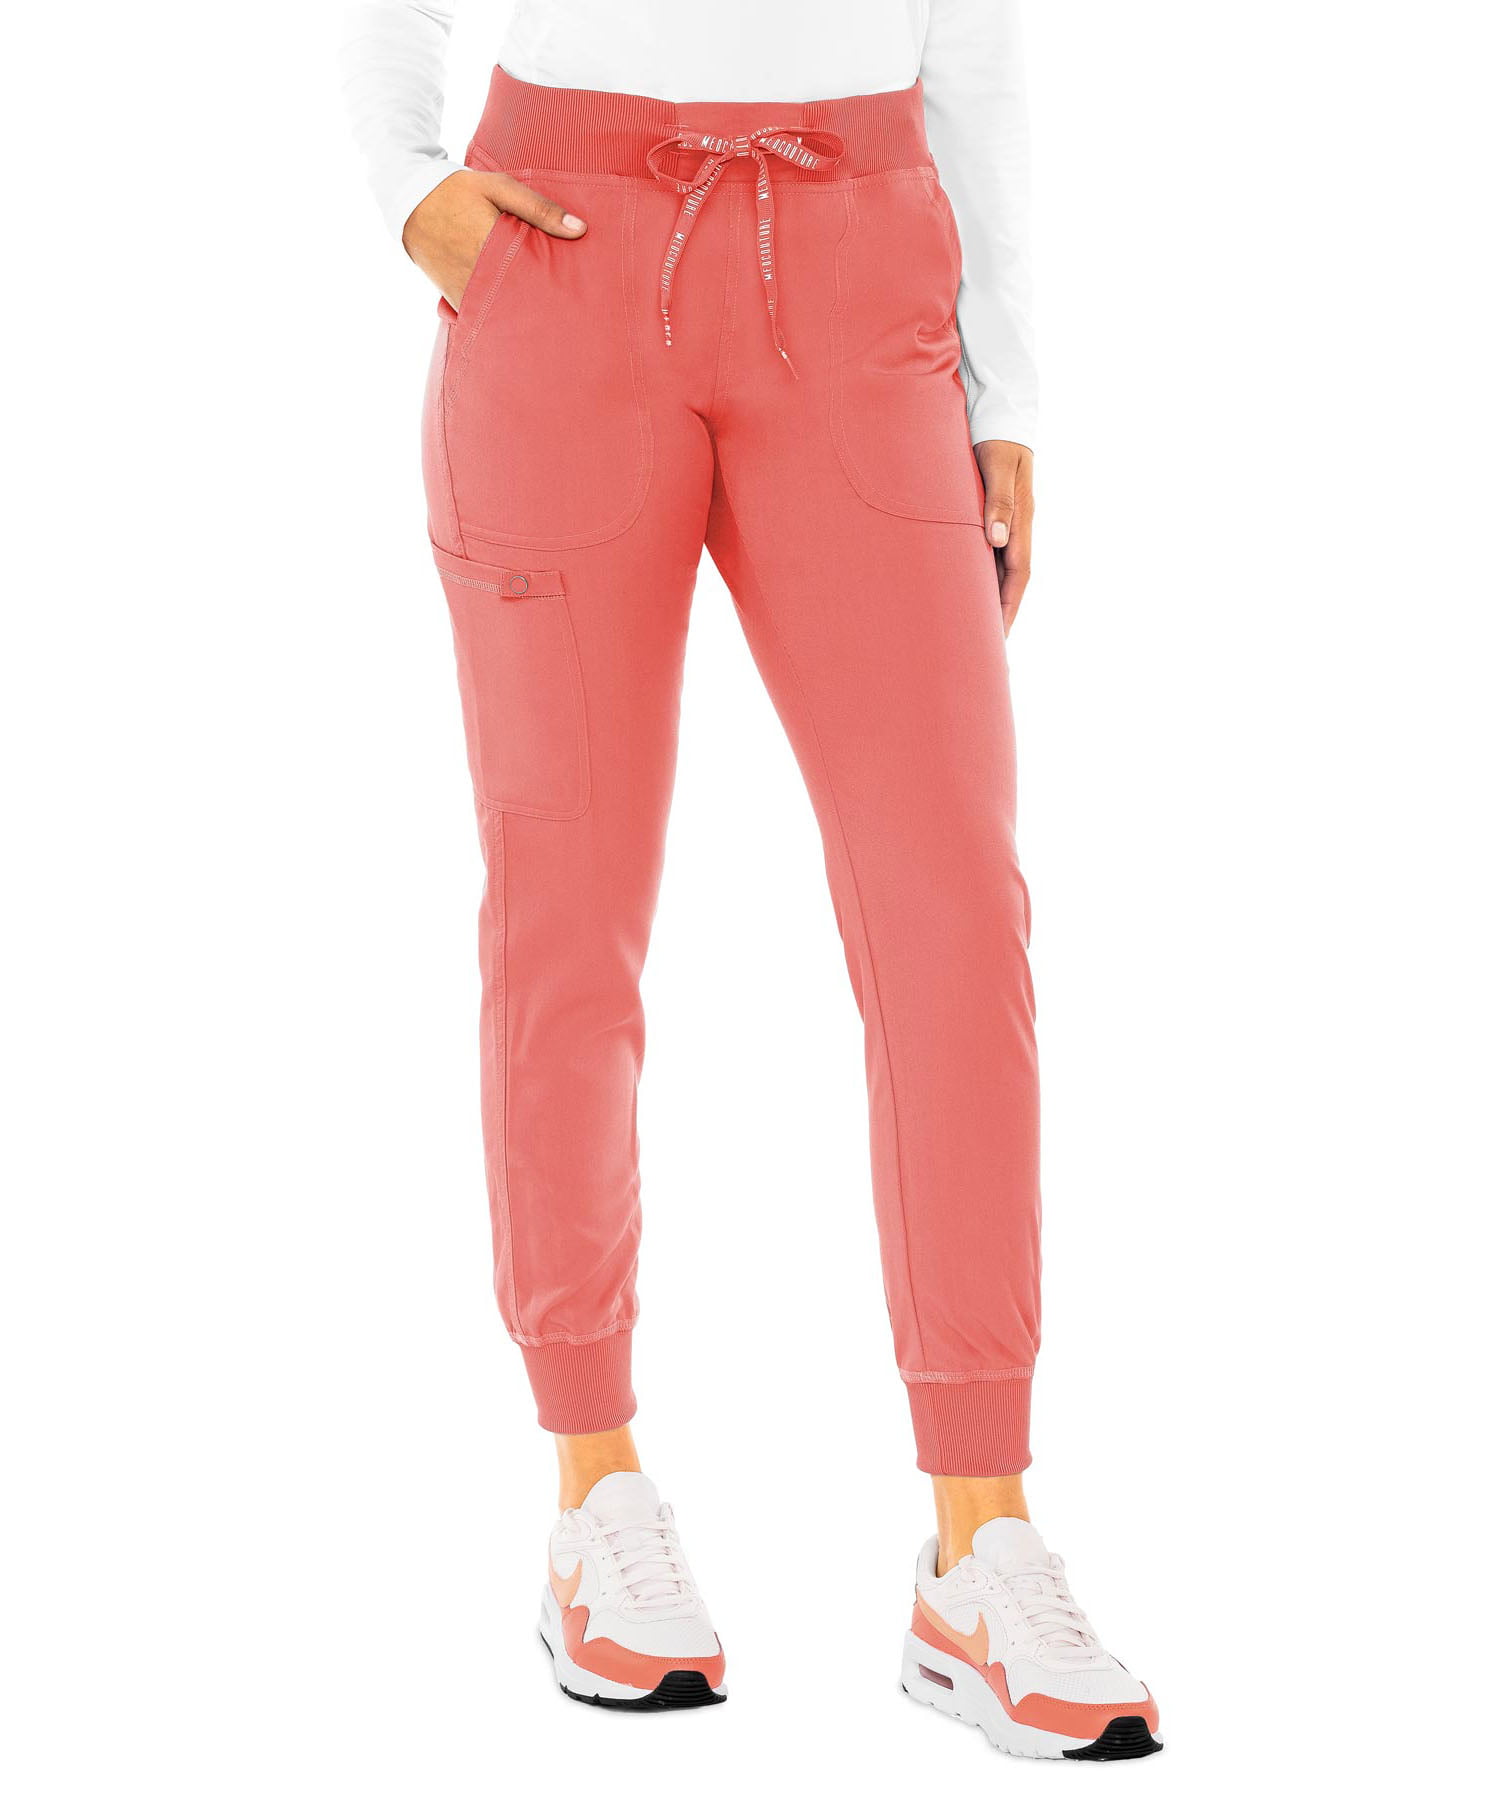 MED COUTURE Women's Touch Jogger Yoga Scrub Pants, Color: Coral